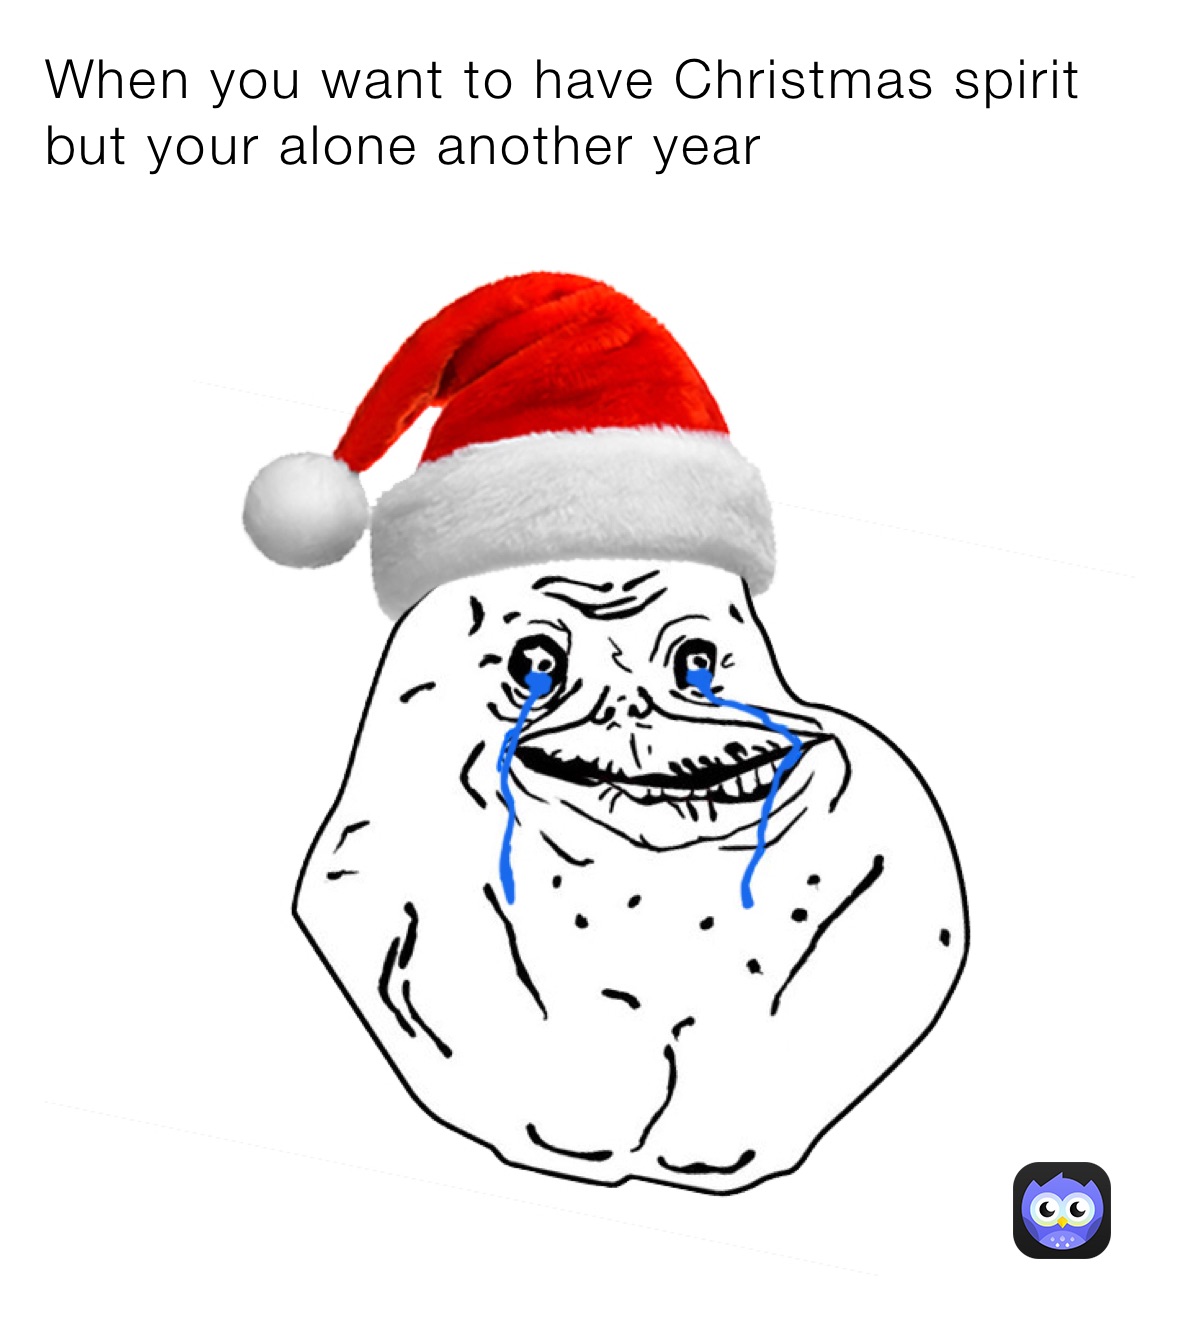 When you want to have Christmas spirit but your alone another year￼